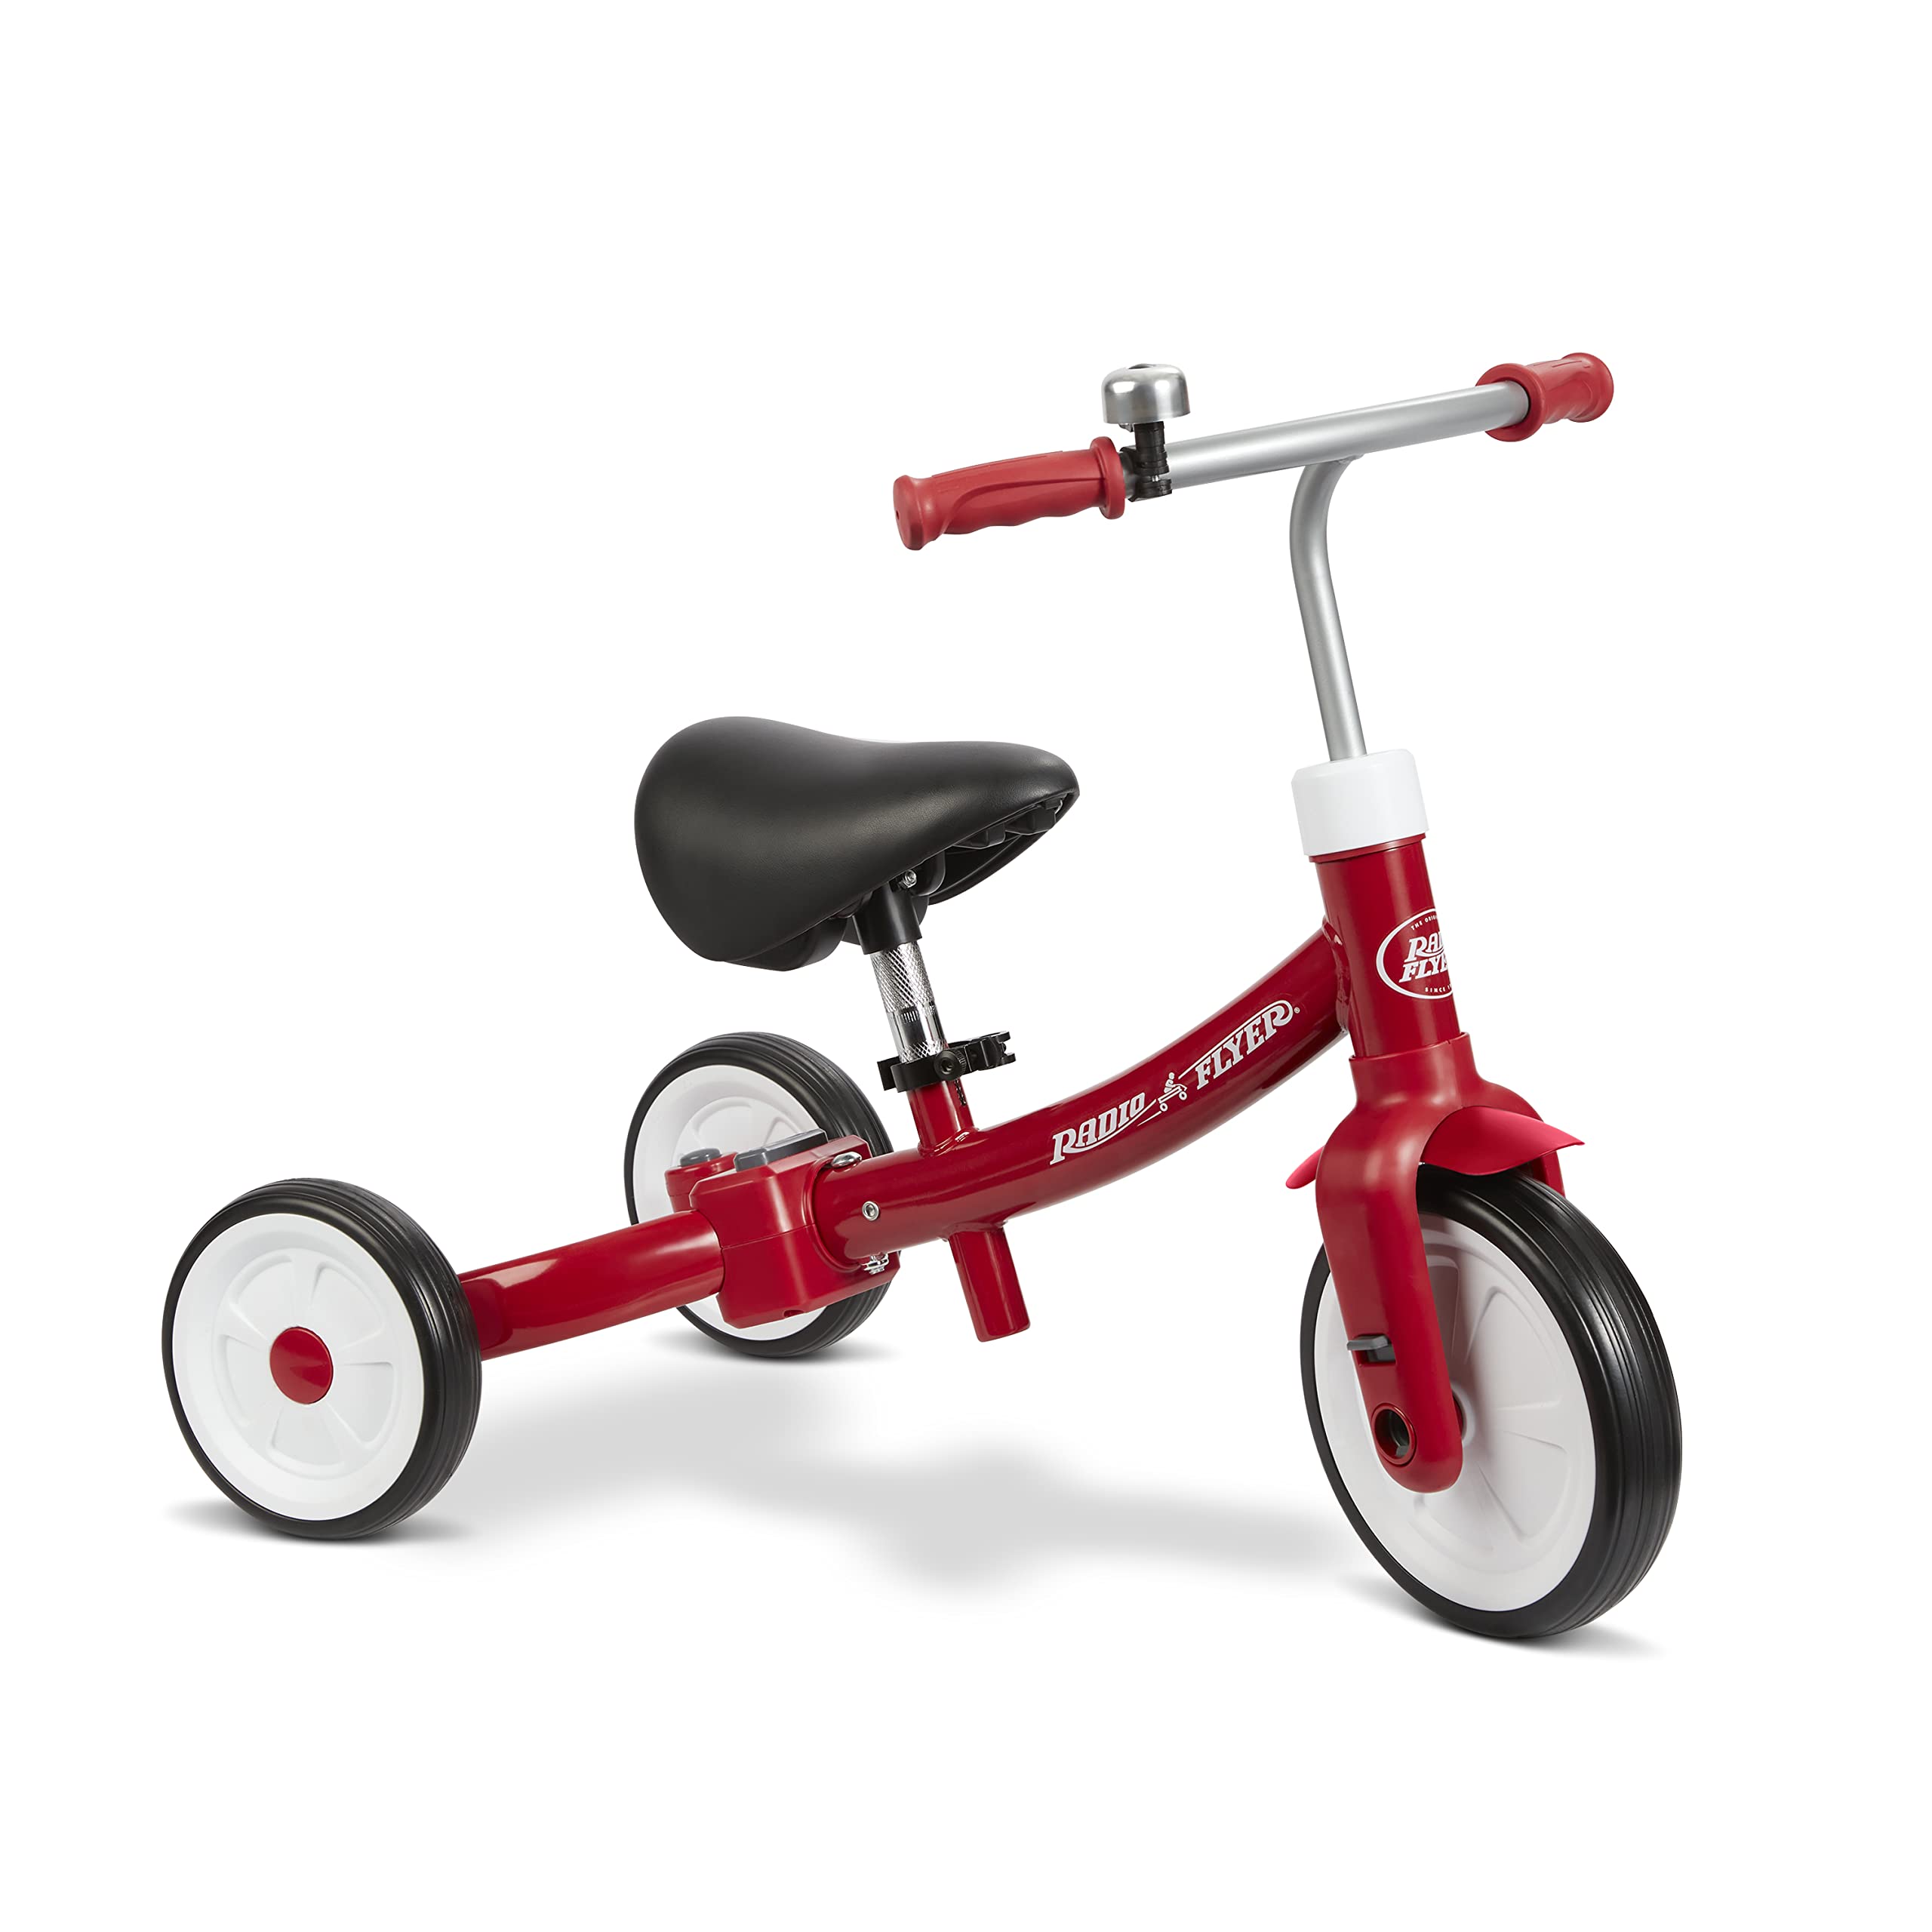 Radio Flyer Triple Play Trike, Toddler Tricycle, Balance Bike and Ride-On, Ages 1-3, Large